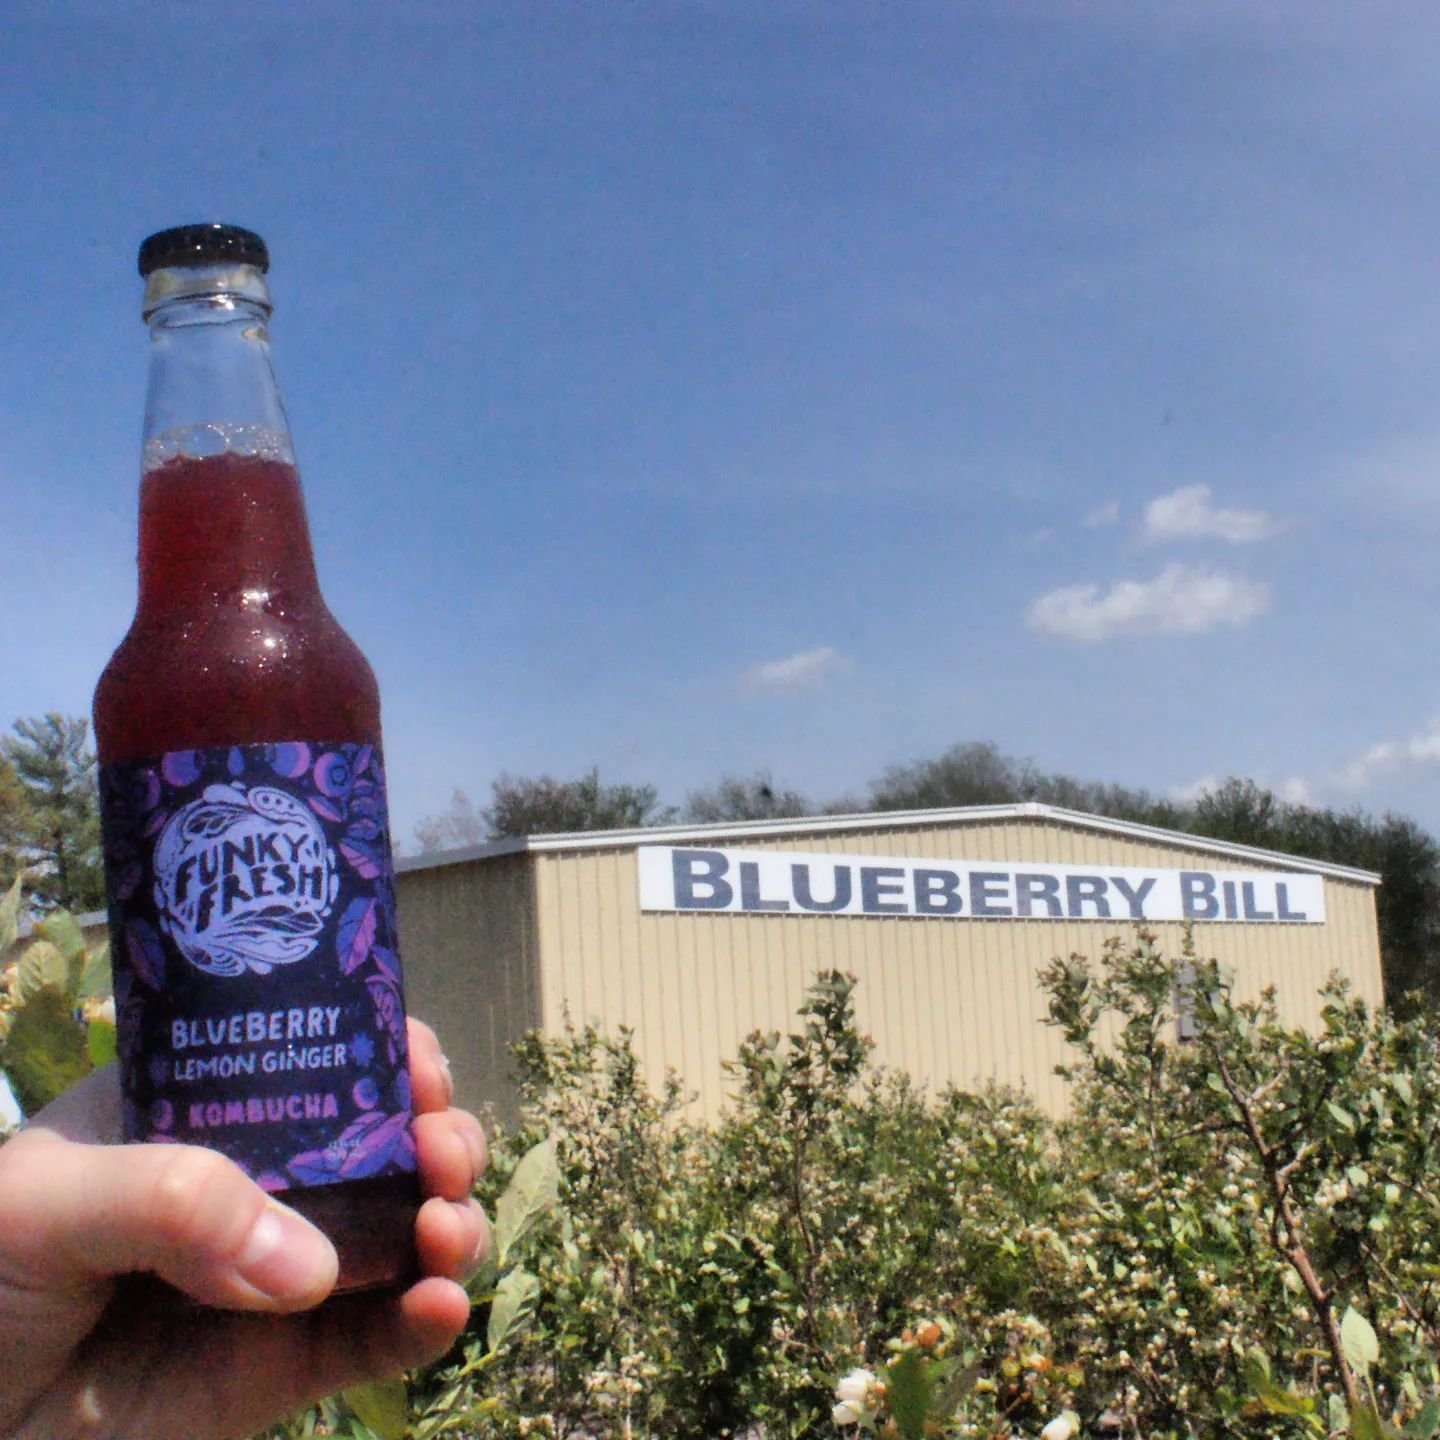 So excited for the return of Blueberry Lemon Ginger this week! The most delicious blueberries from @blueberrybillfarms are pressed and brewed in harmony with bright lemon verbena and lemon balm with a touch of ginger at the end. Enjoy! We have anothe